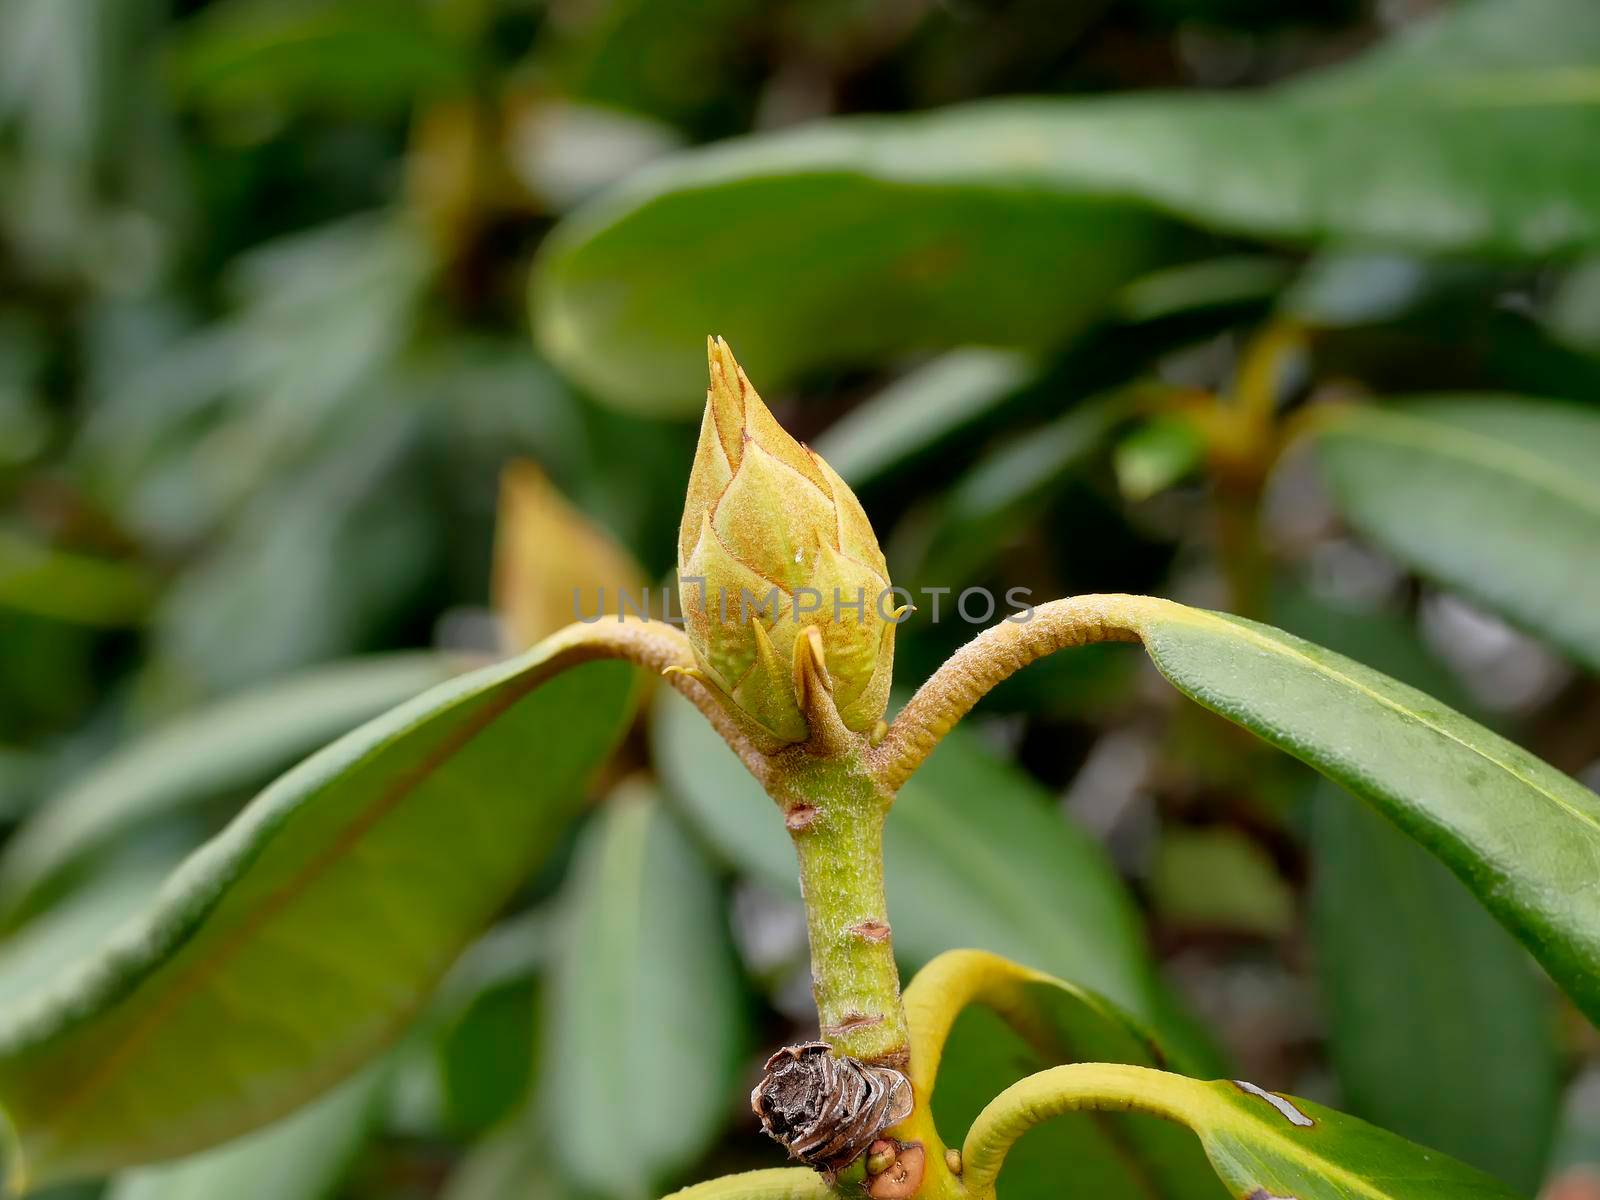 Rhododendron bud in wintertime in Germany